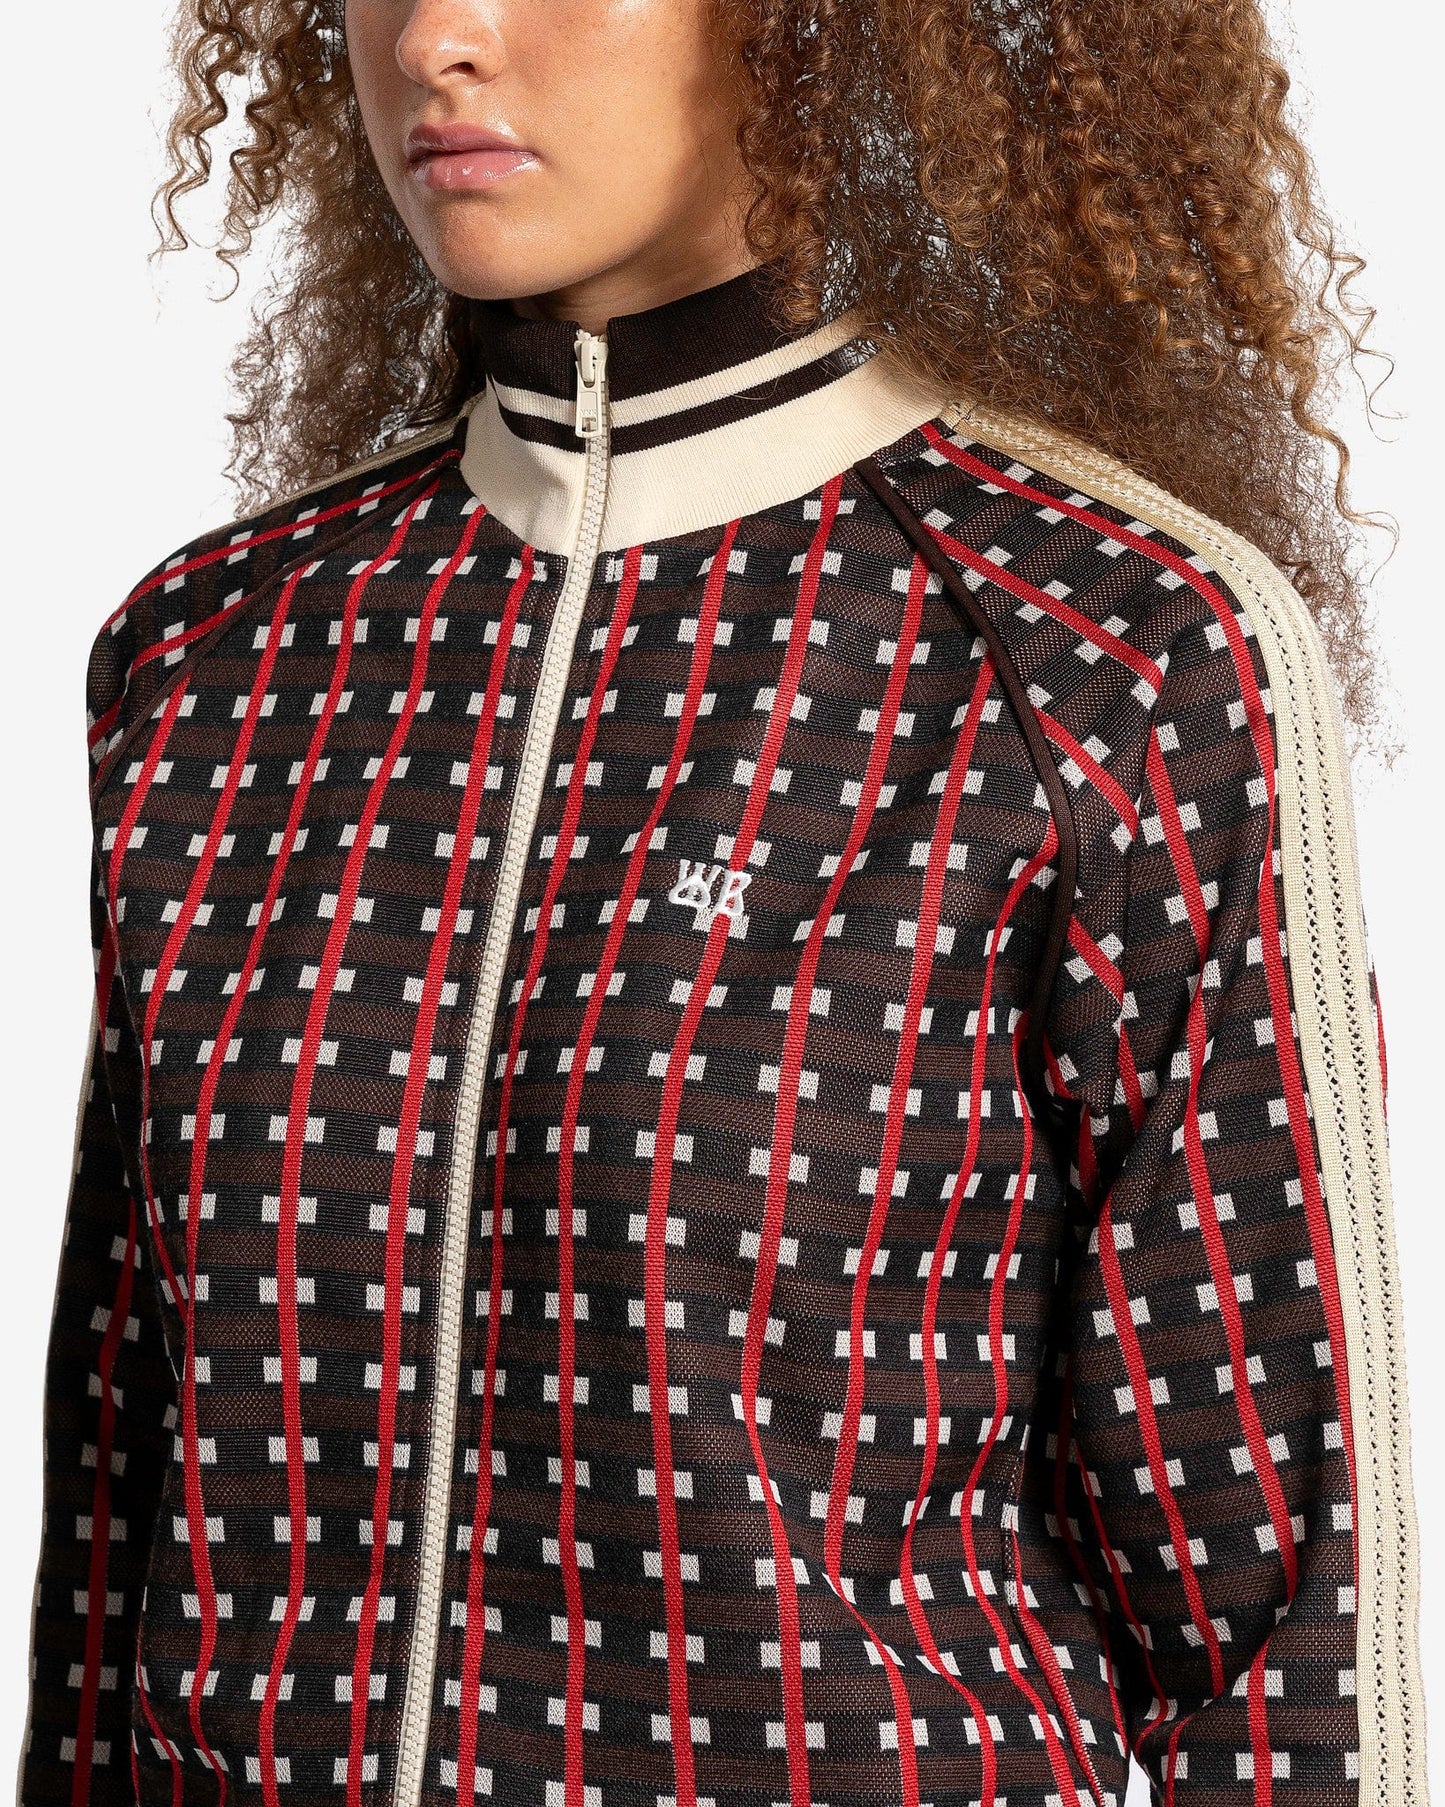 Wales Bonner Women Jackets Power Tracktop in Brown/Red